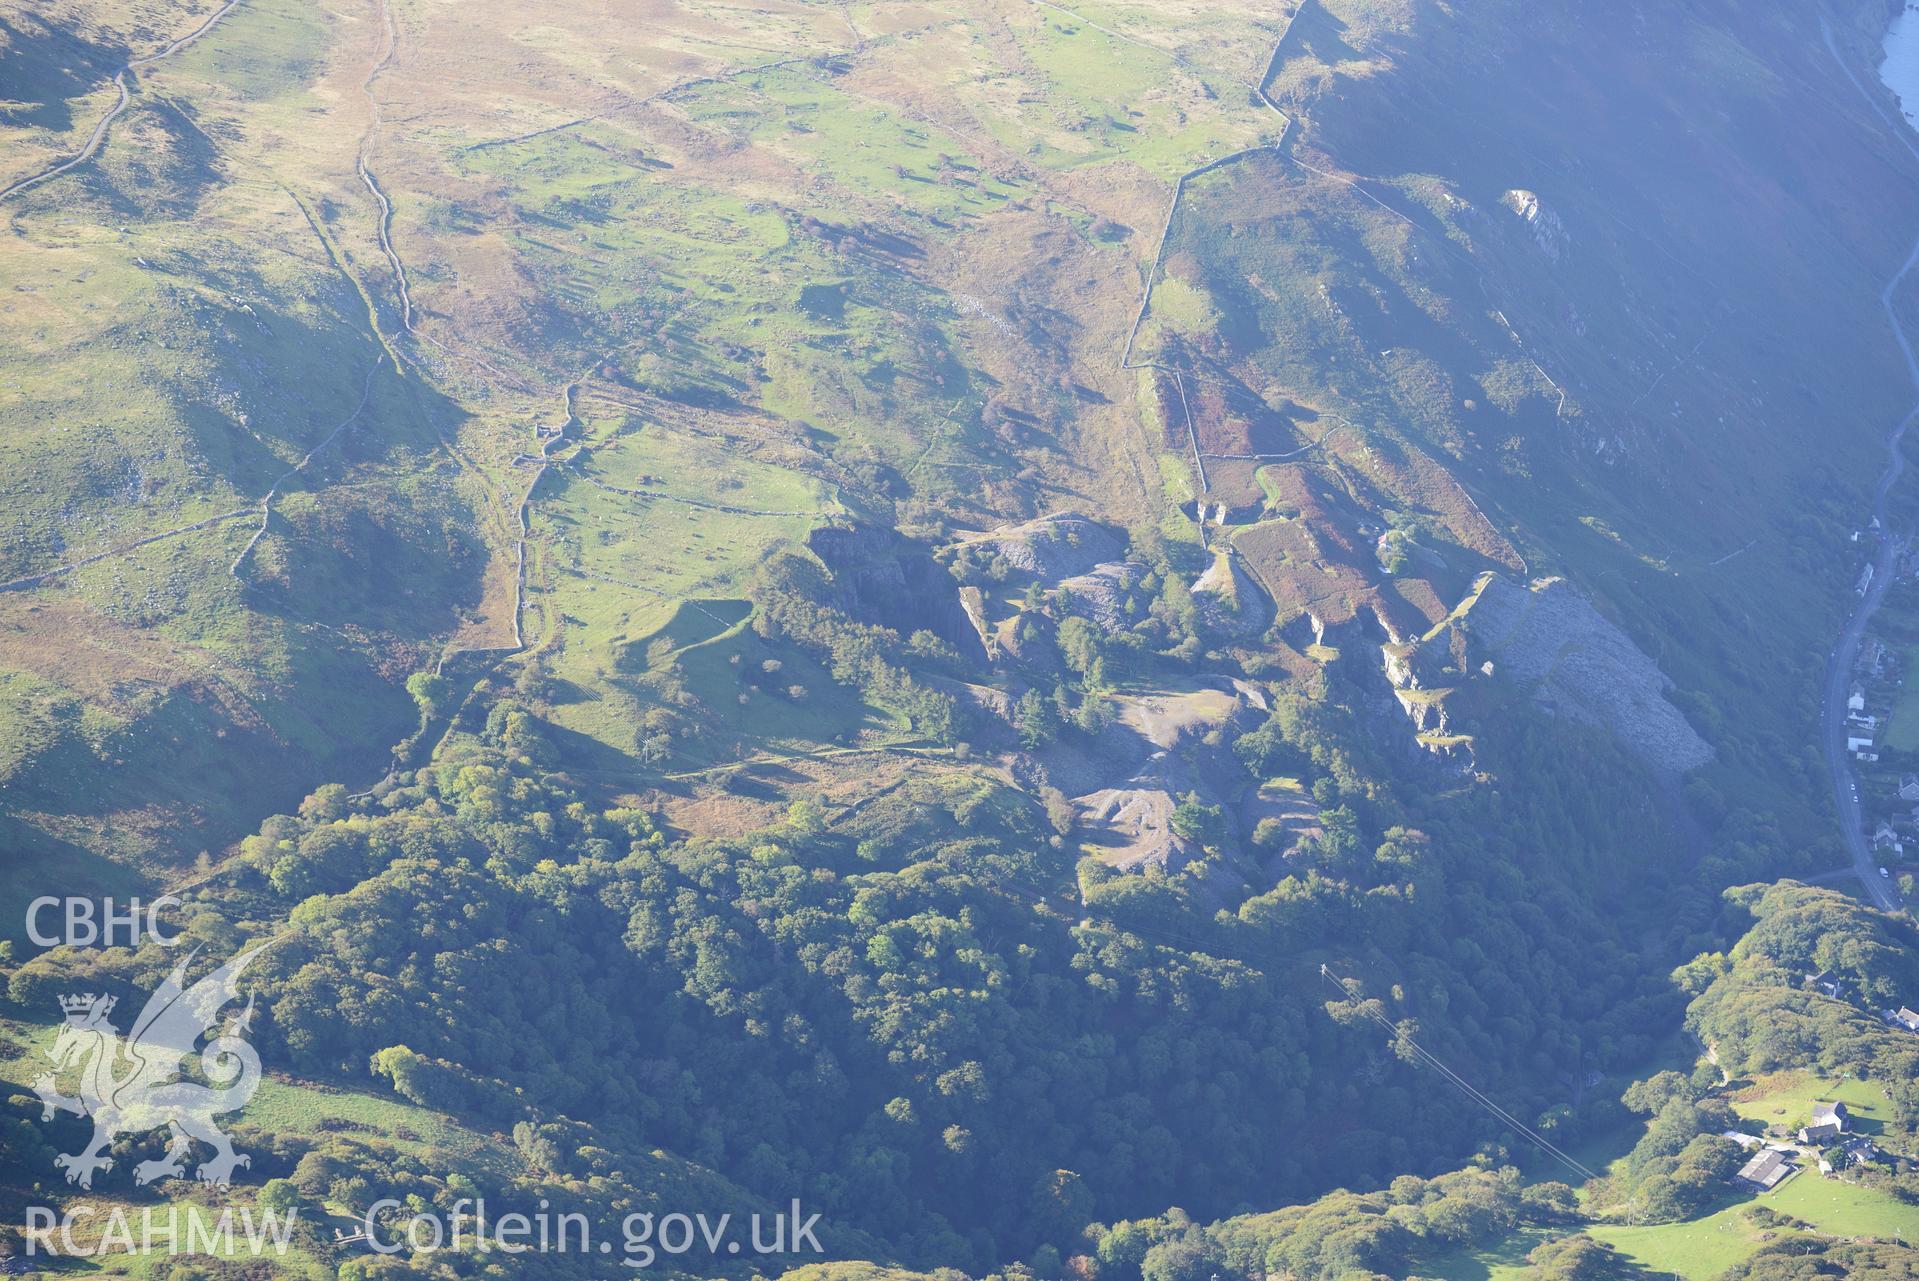 Hen-Ddol slate quarry, south east of Fairbourne. Oblique aerial photograph taken during the Royal Commission's programme of archaeological aerial reconnaissance by Toby Driver on 2nd October 2015.